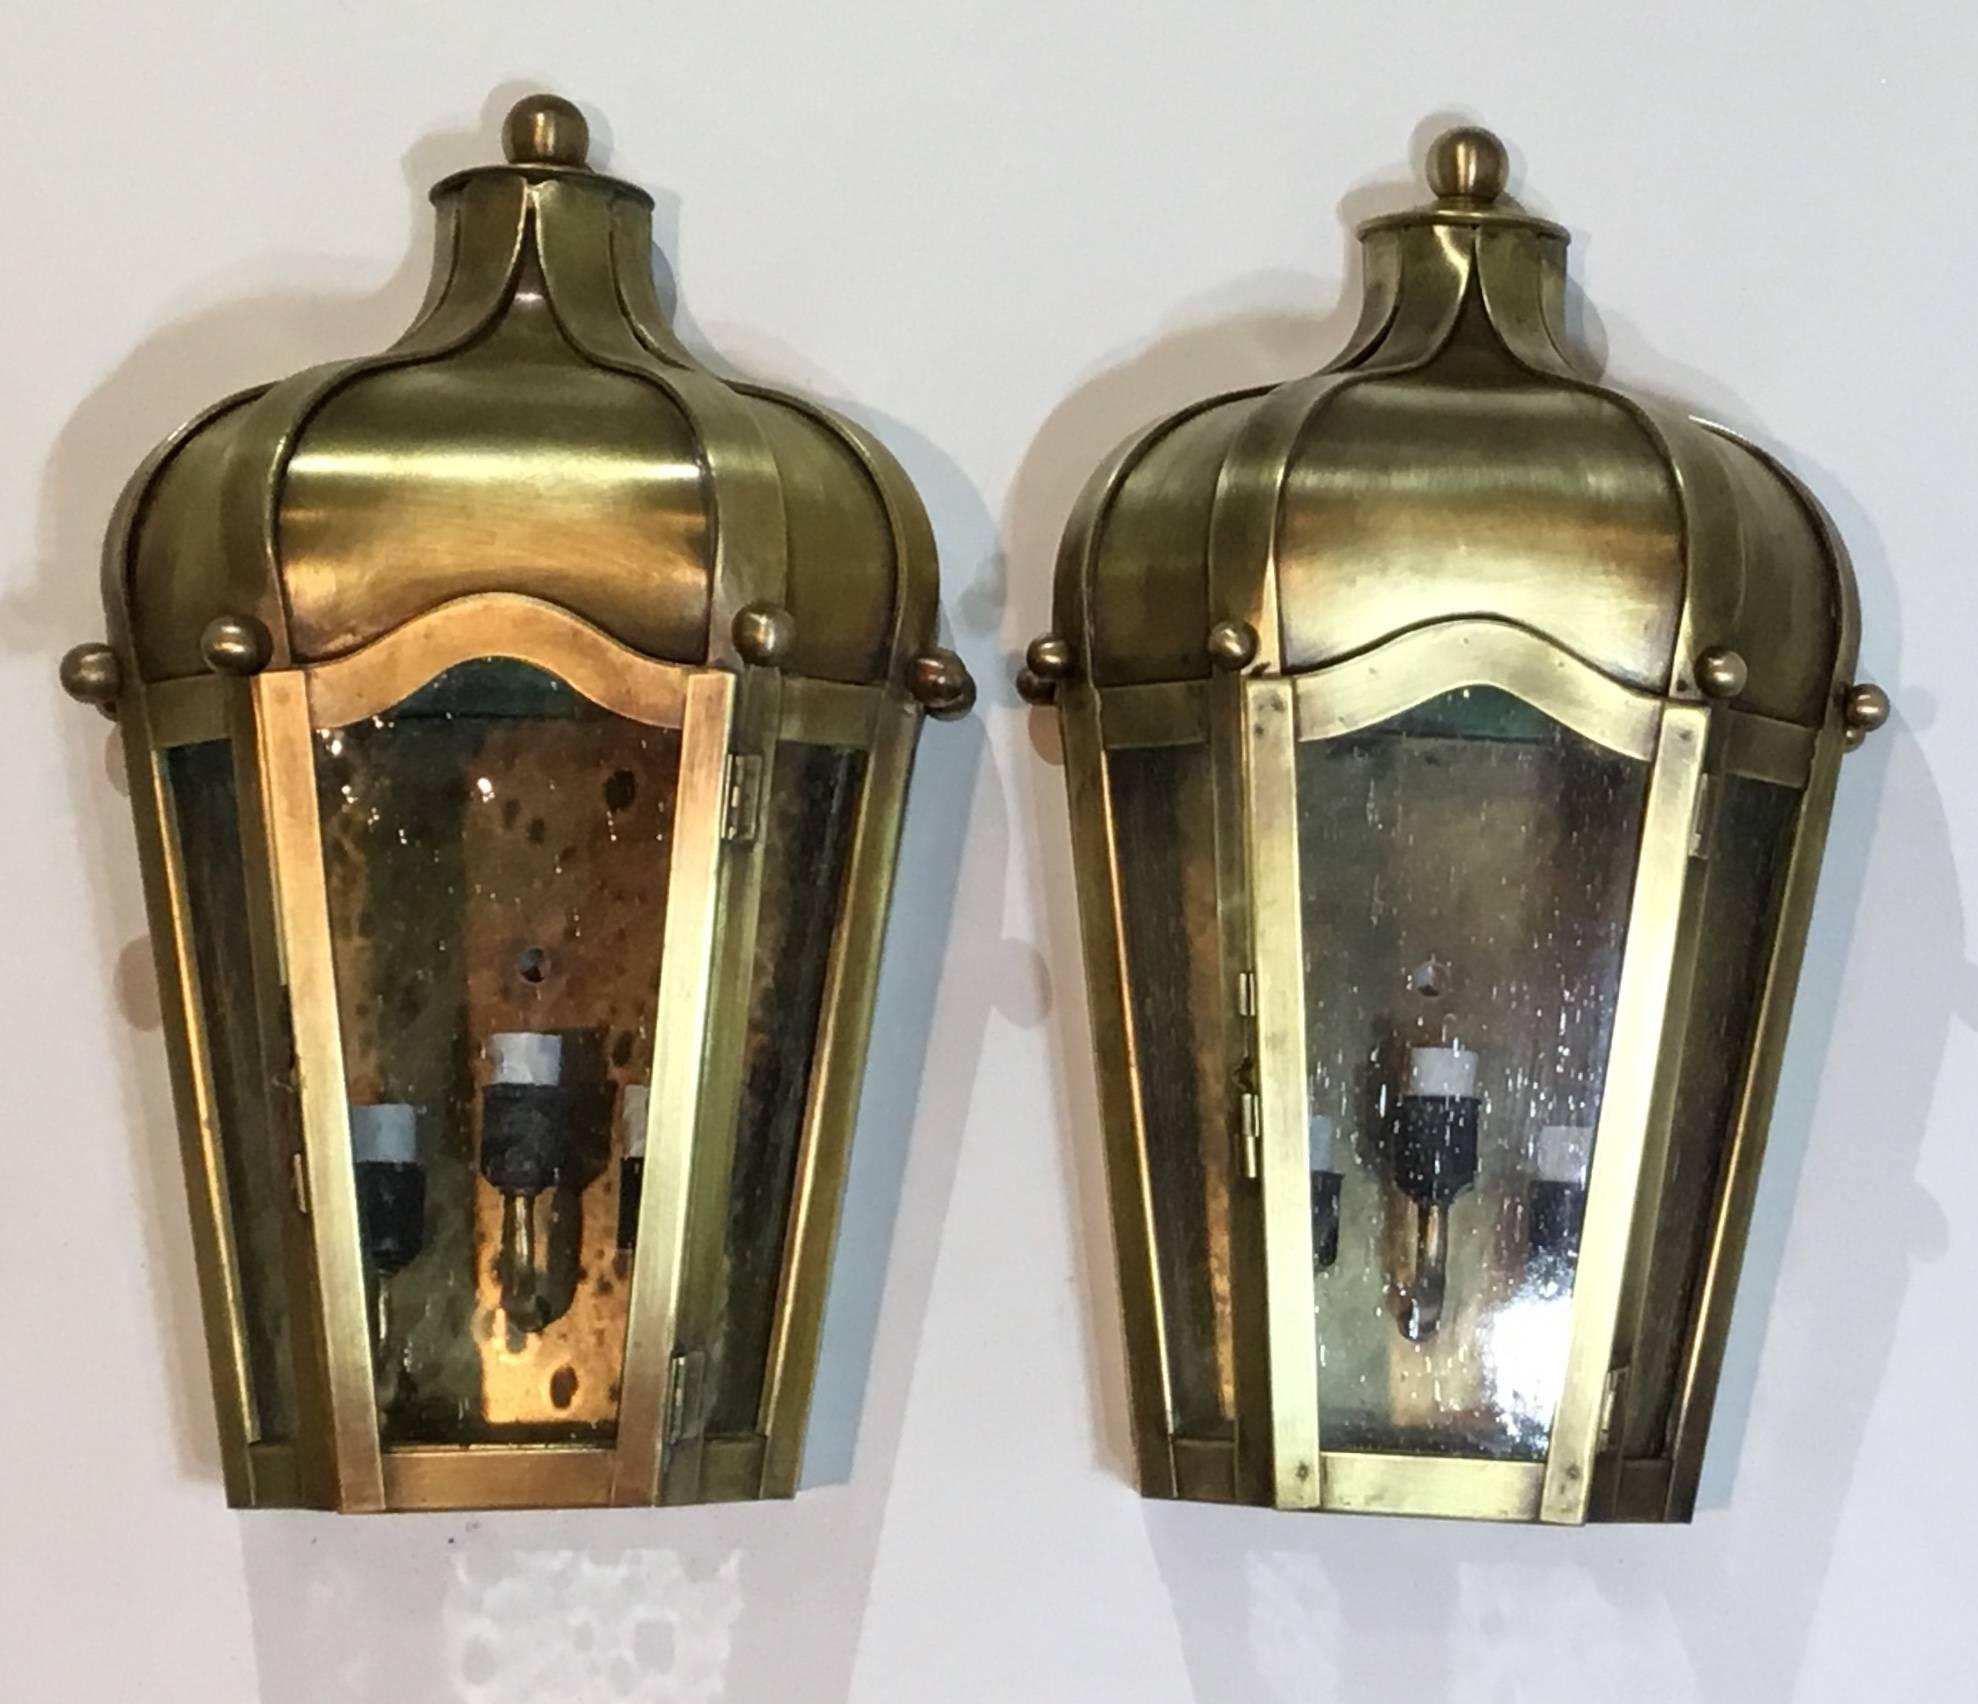 Pair of beautiful handcrafted wall-mounted brass lantern and seeded glass, artistically made and forged by hand, electrified with three 40/watt lights each, suitable for wet locations, UL approved 
Up to US code. Great decorative pair in the front